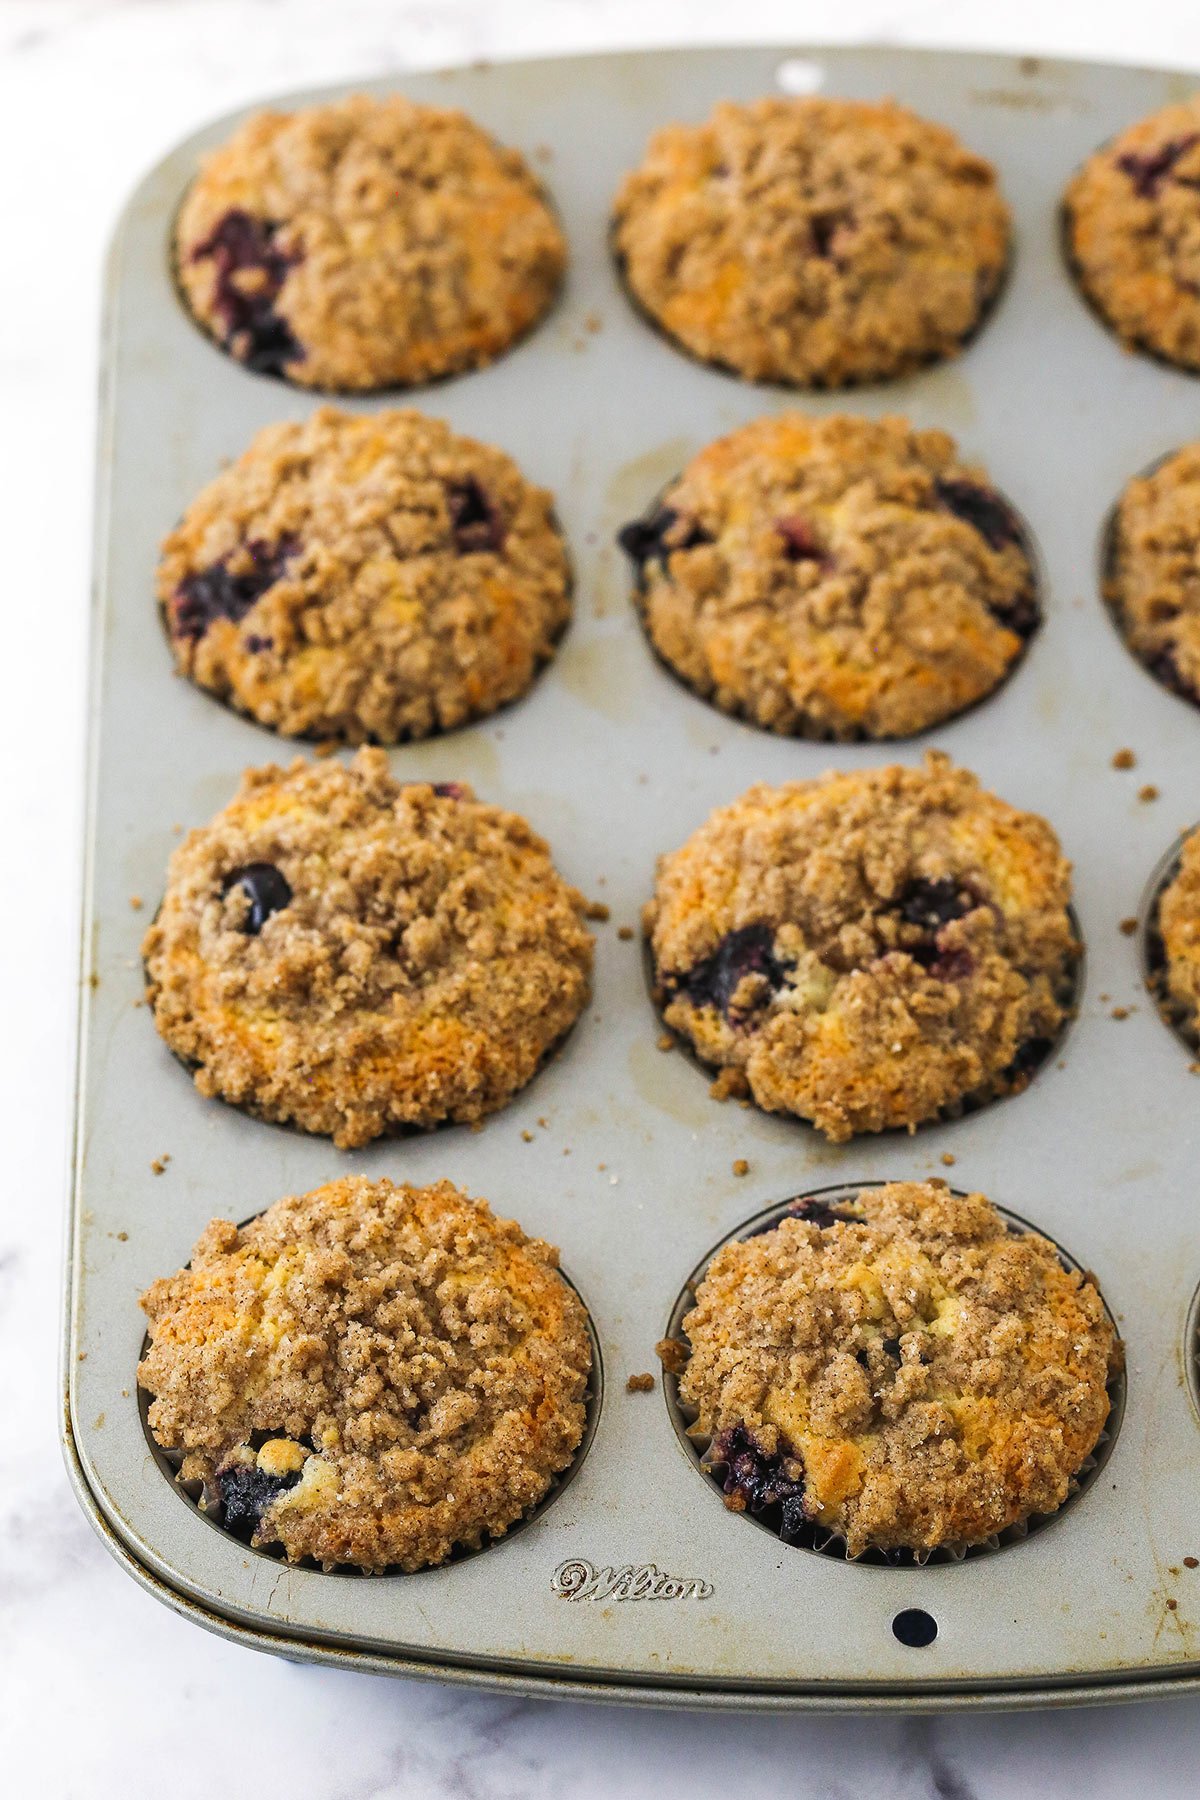 A muffin tin full of freshly baked blueberry muffins with cinnamon streusel on top